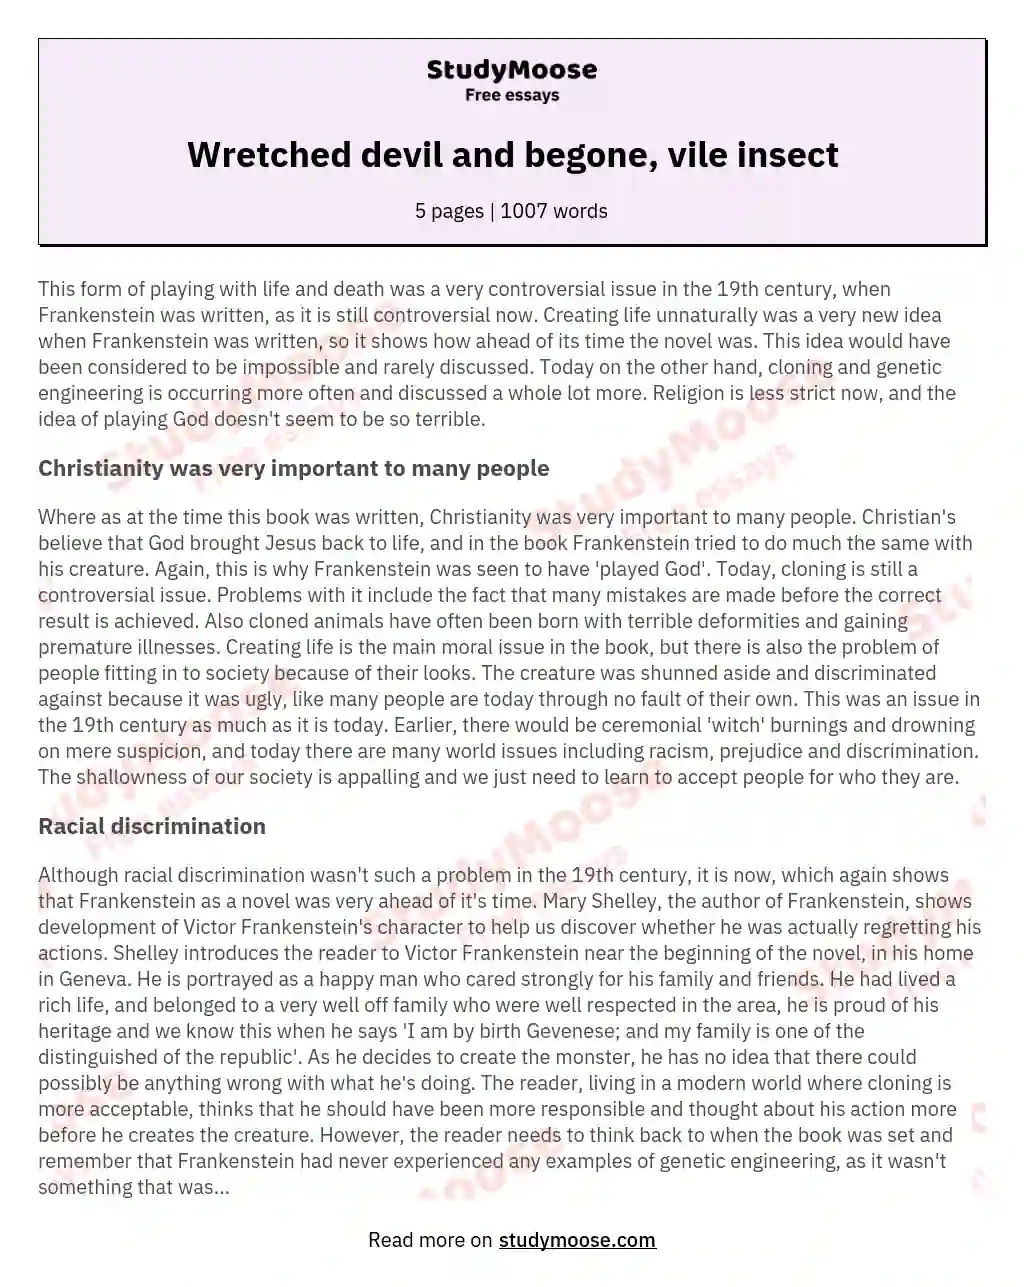 Wretched devil and begone, vile insect essay